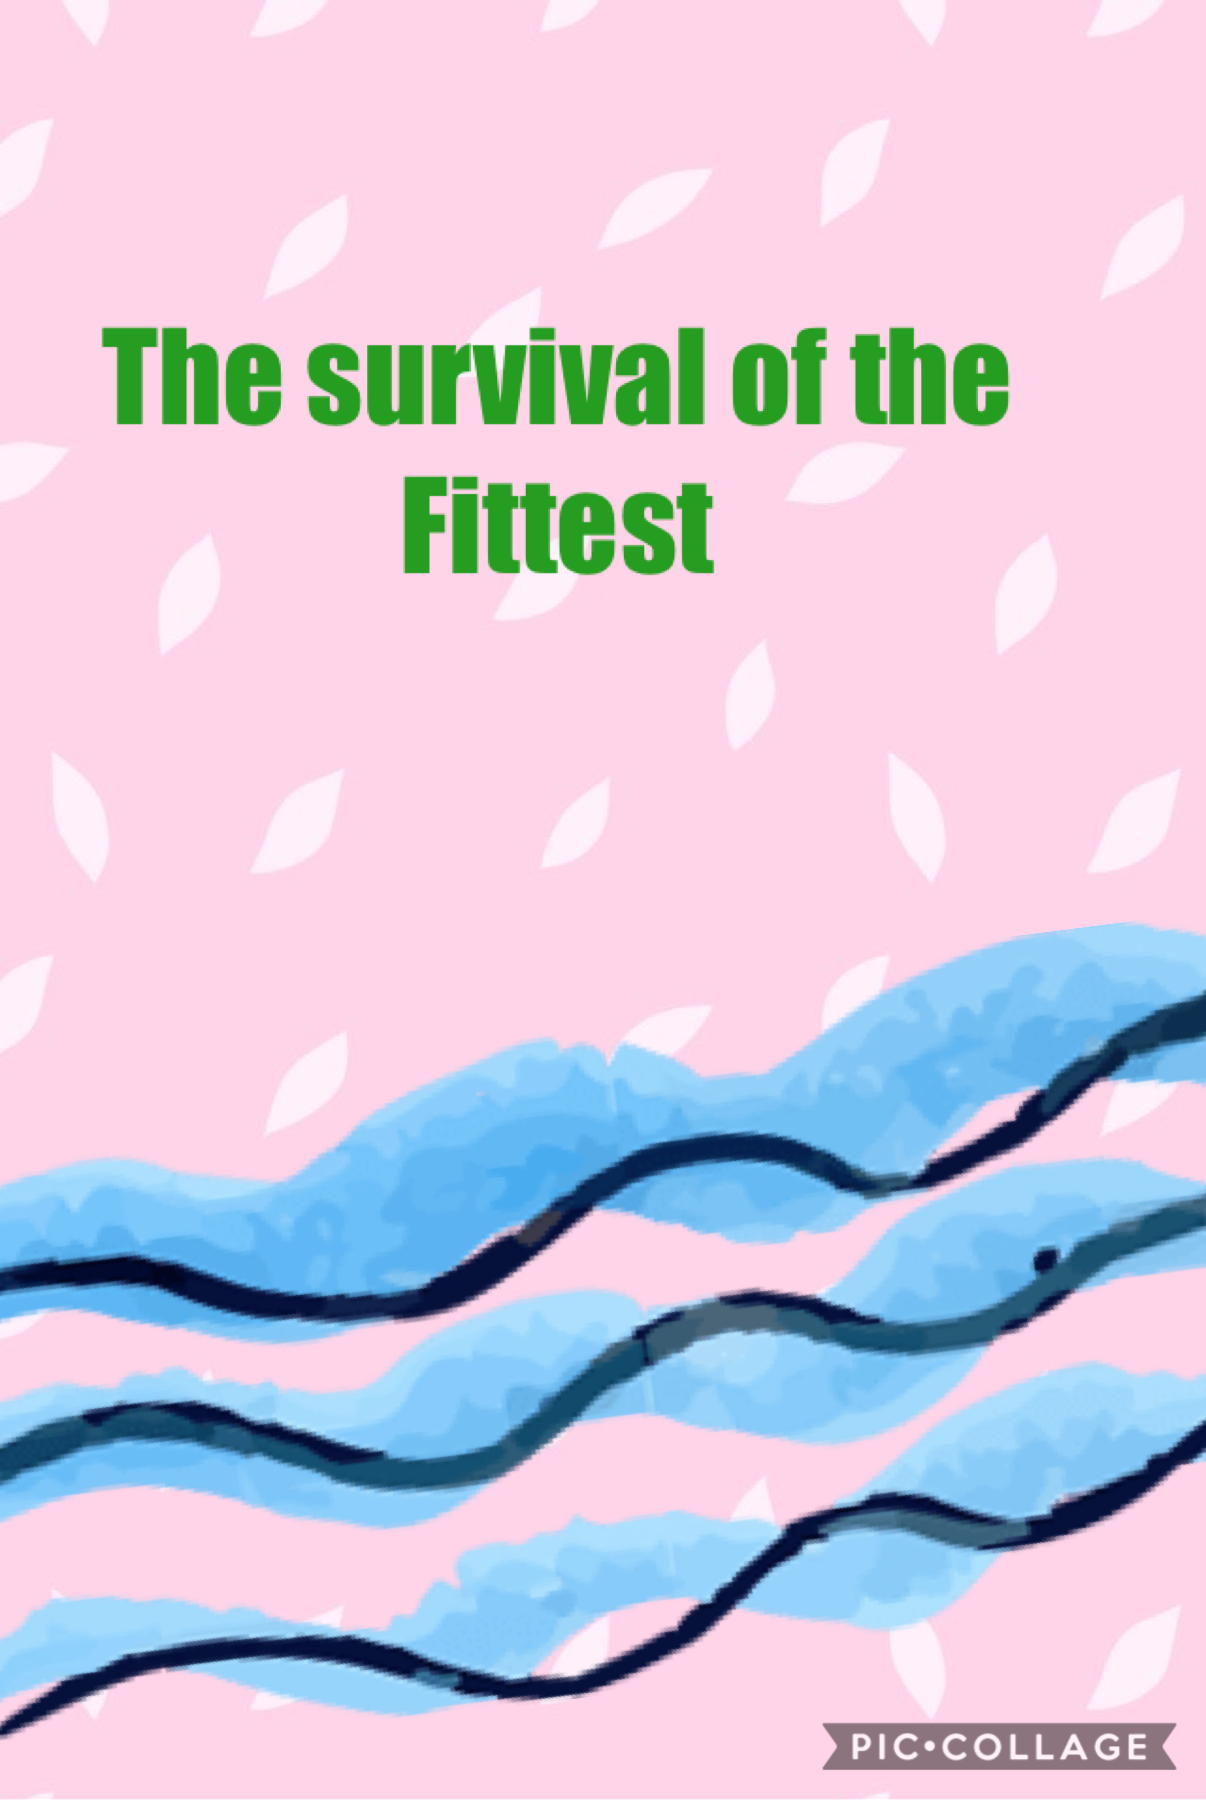 Survival of the fittest poster